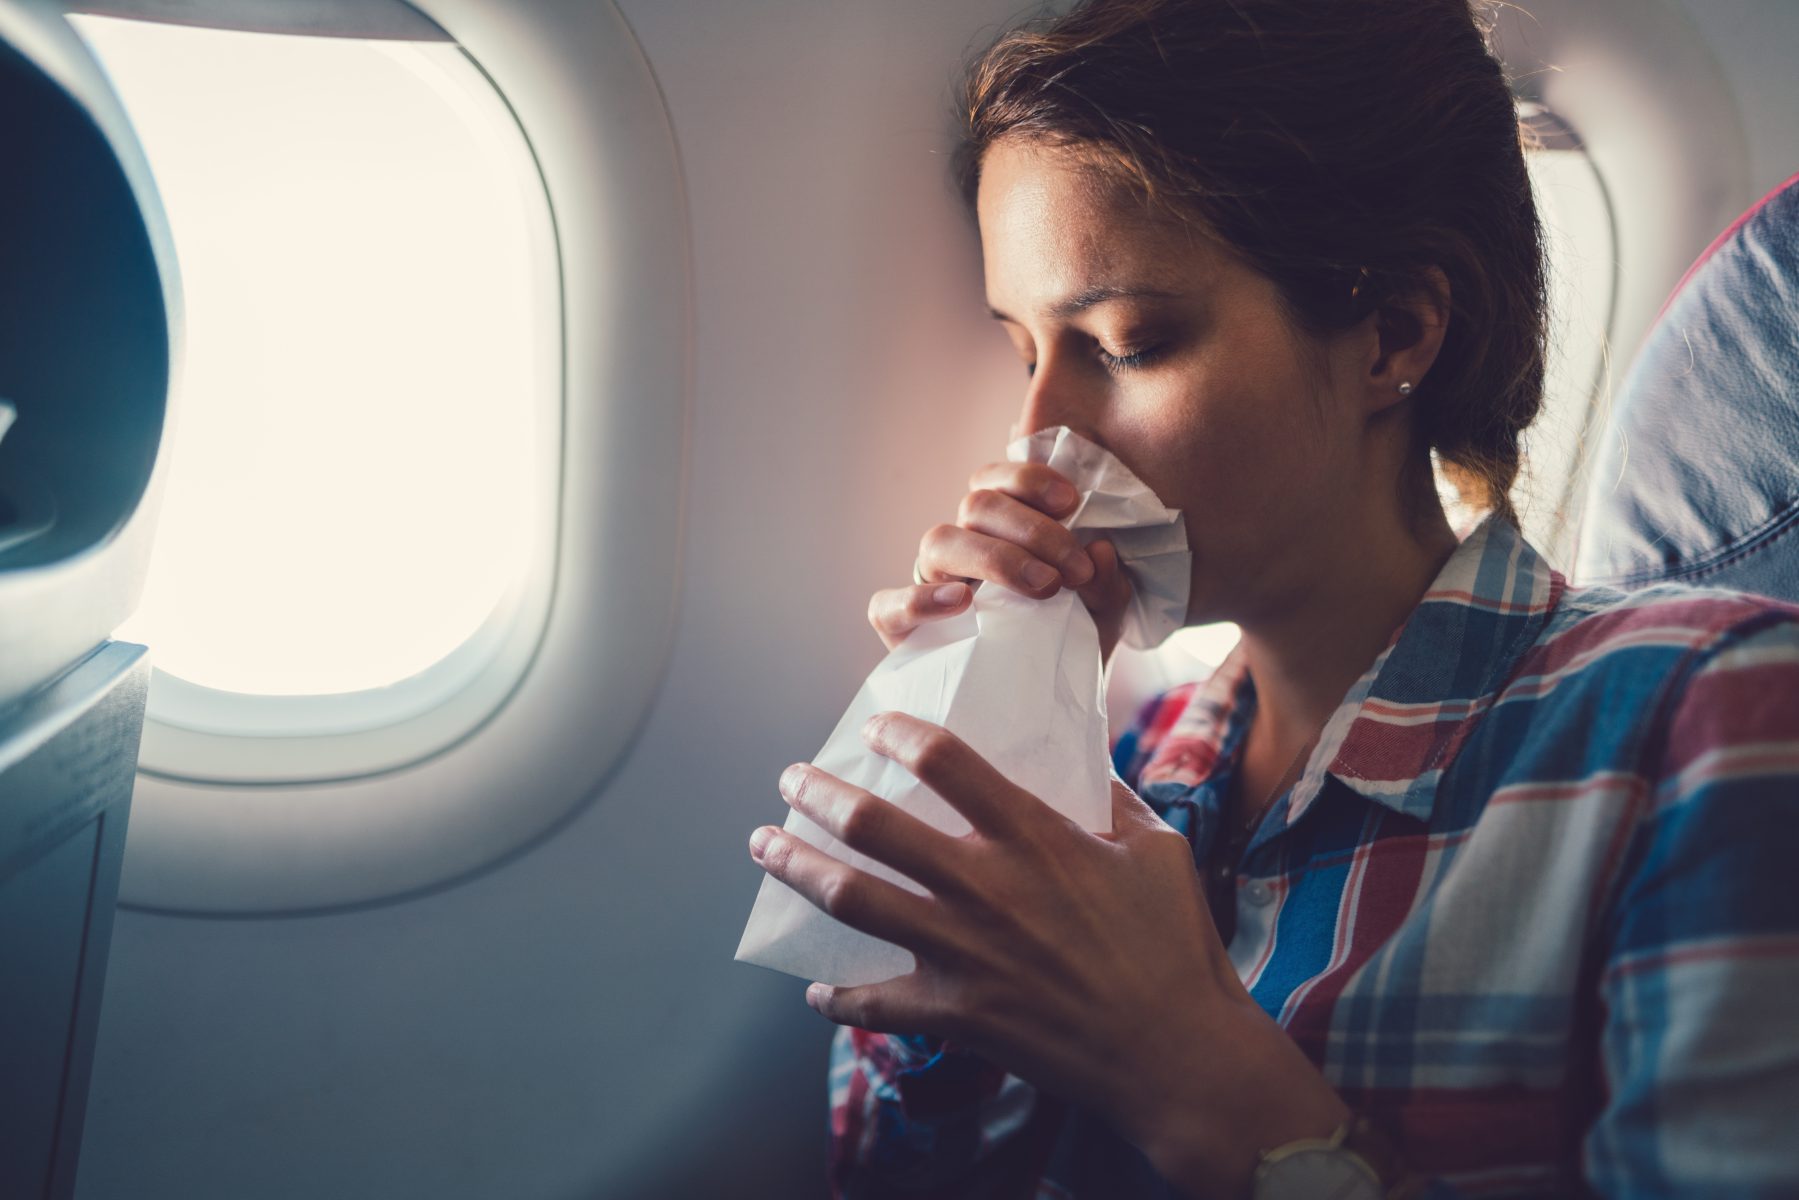 Airplanes are Common Places that Travelers End Up Catching the Cold or Flu. But Following These 10 Tips, Will Keep You Healthy on Your Next Flight.